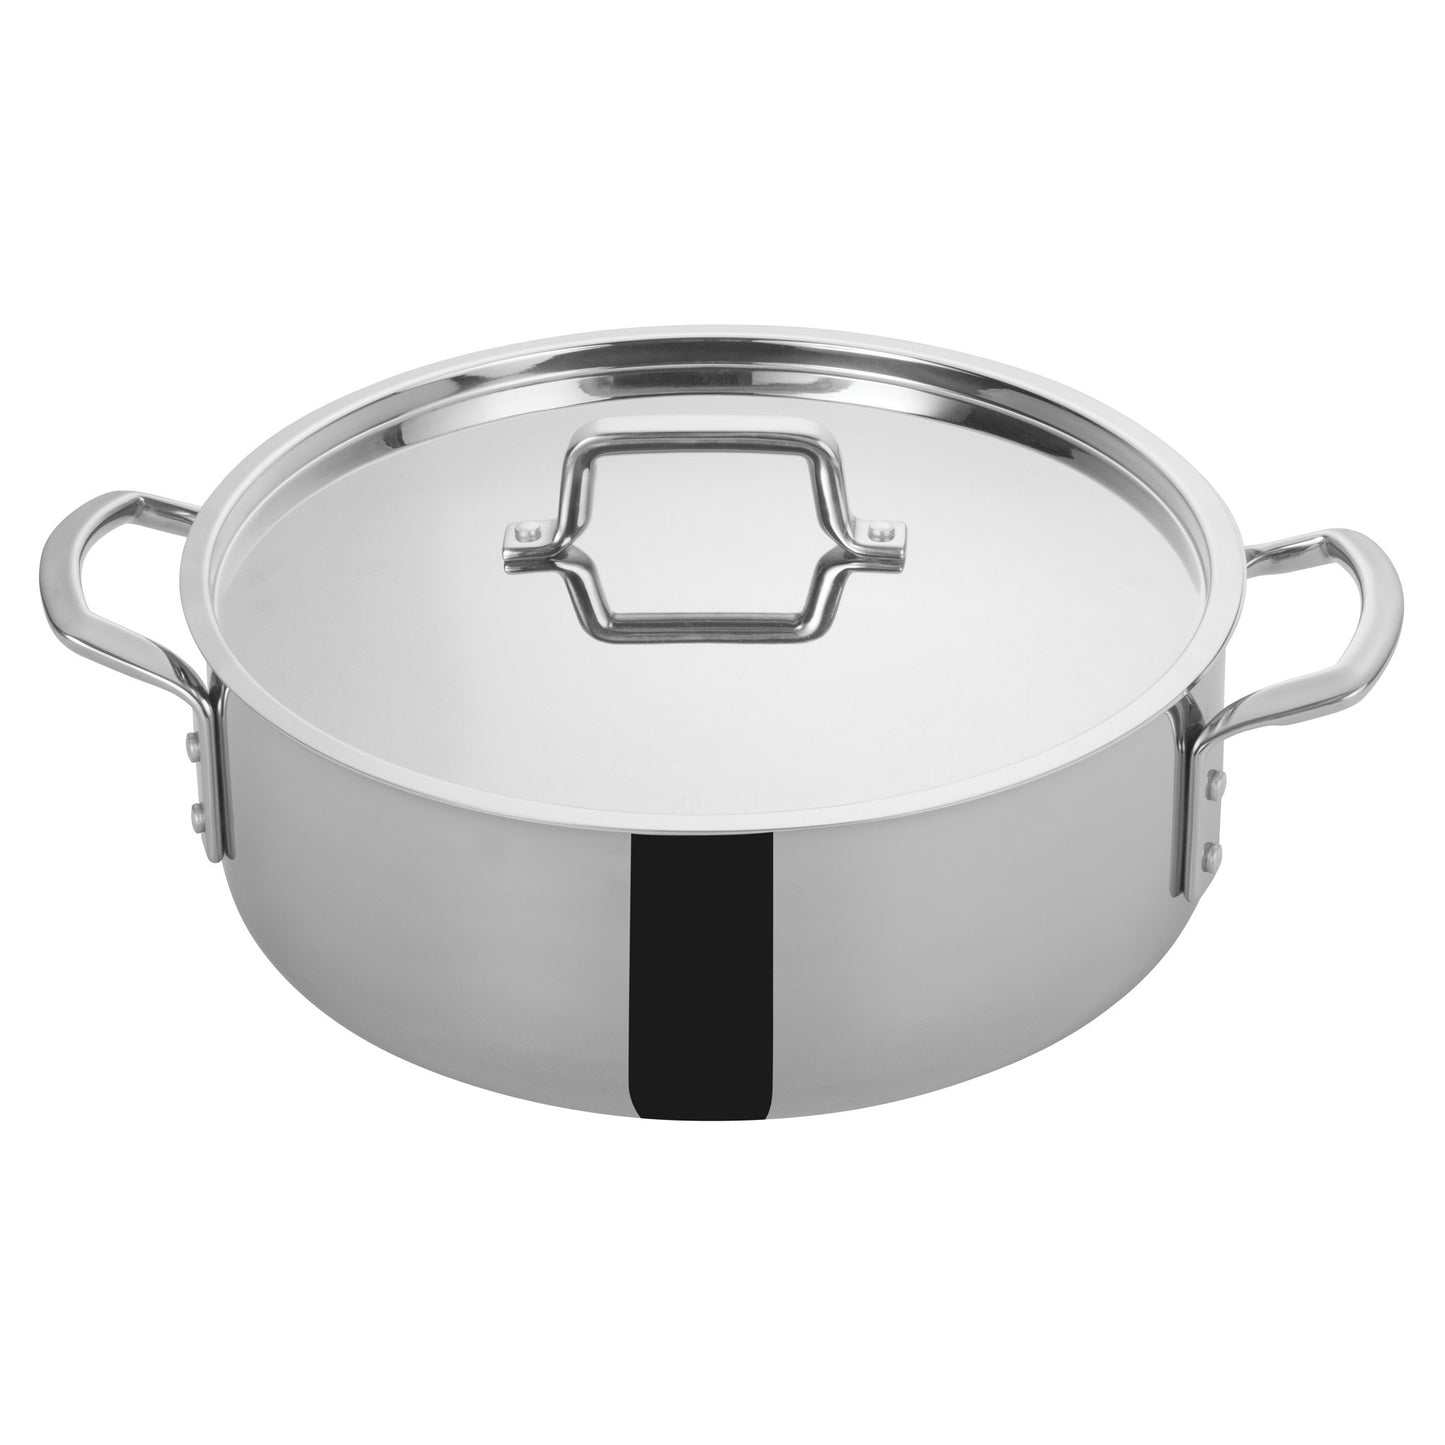 TGBZ-12 - Tri-Gen Tri-Ply Stainless Steel Brazier with Cover - 12 Quart